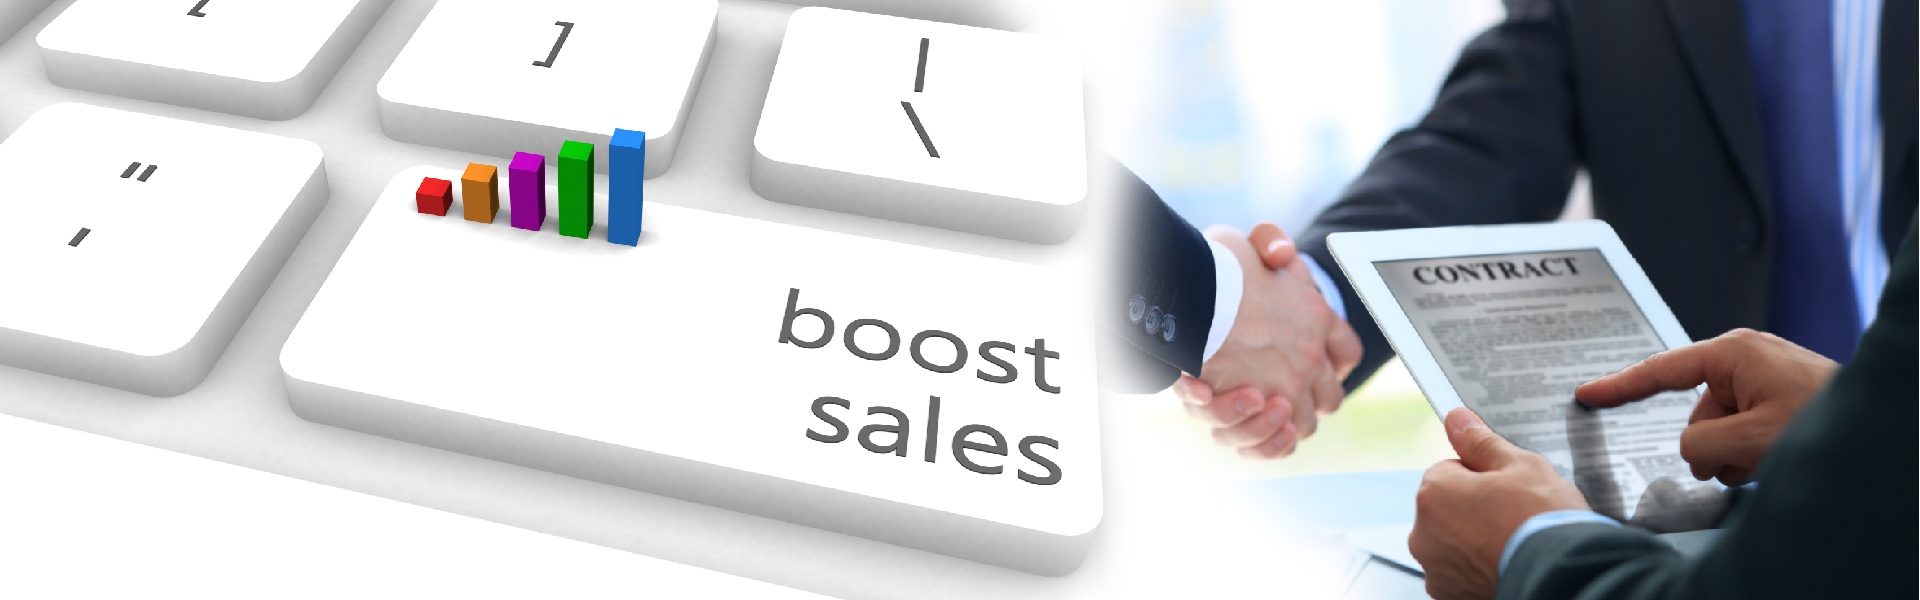 Blog images_Boosting Sales with Digital Signatures as a Catalyst 